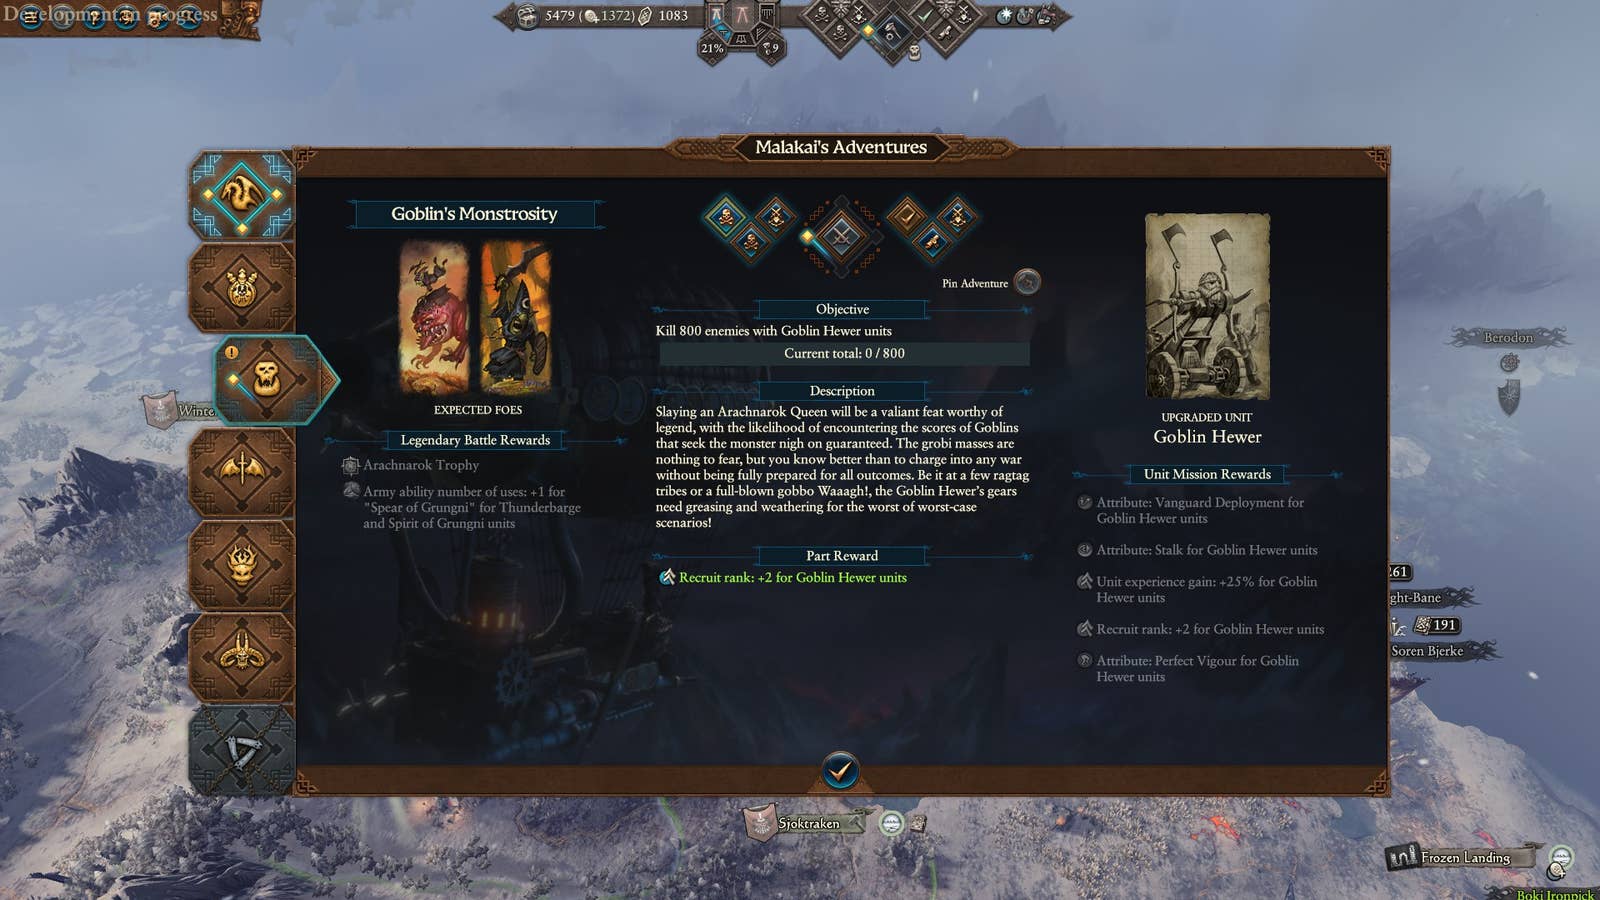 If you just buy one Total War: Warhammer 3 Thrones Of Decay lord, make it Malakai Makaisson